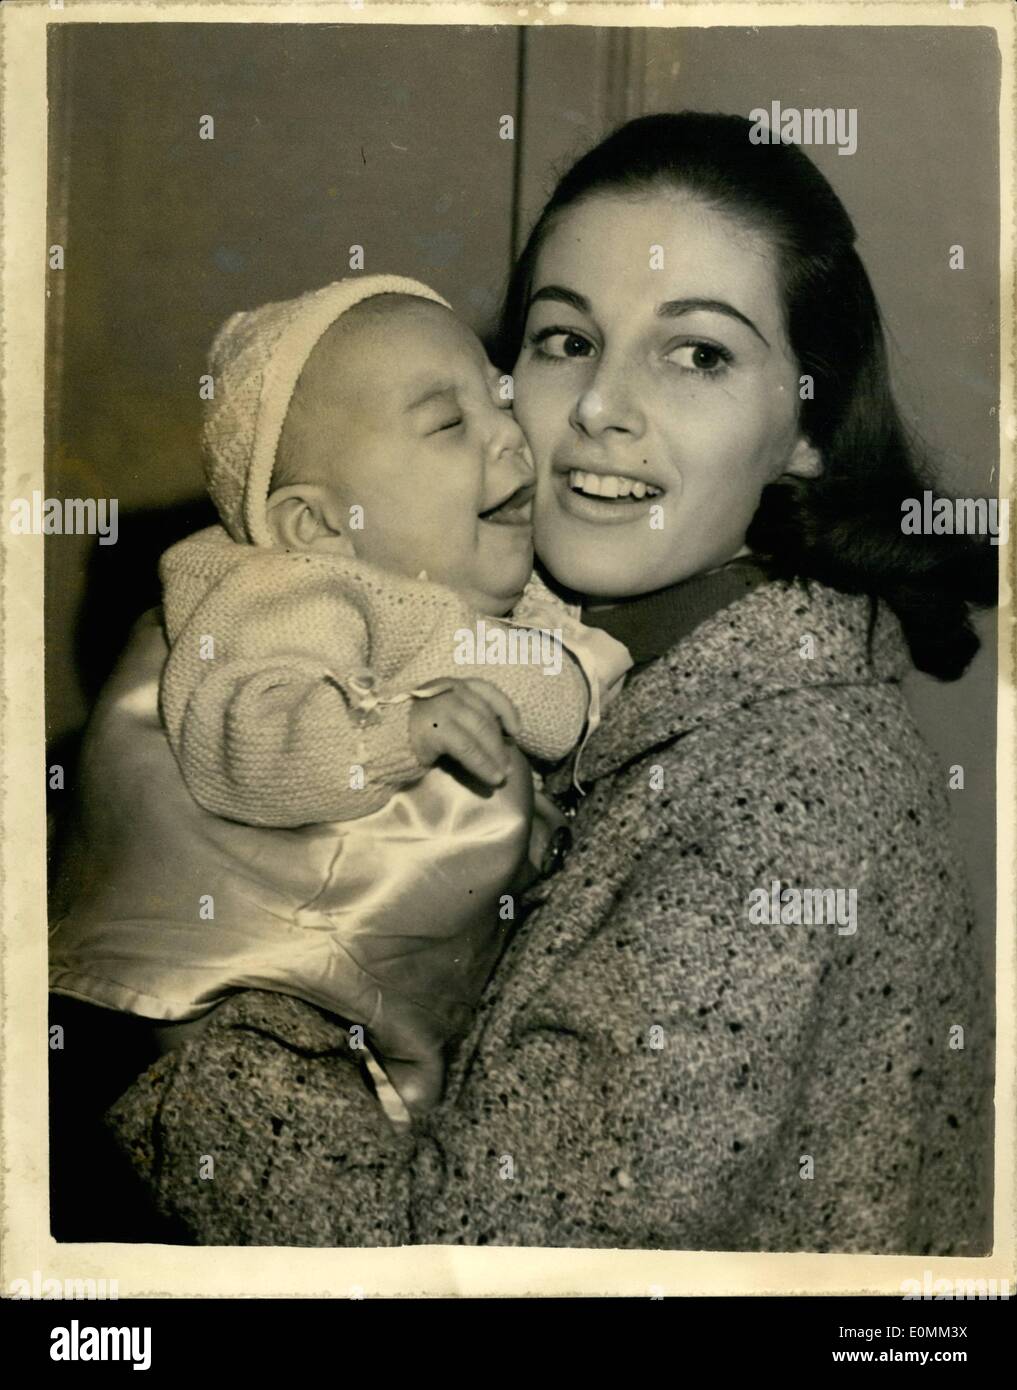 Nov. 11, 1955 - Pier Angeli meets her ''Miracle Baby'' . He arrives at London airport. Screen star Pier Angeli who is filming in this country went to London airport this evening to meet her baby three months old Perry known as the ''Miracle Baby'' because he survived after Pier's pelvis was fractured when a plane hit an air pocket , Pier is the wife of American born Italian crooner Vic Damone. Photo shows Pier Angeli with her baby on his arrival at London airport this evening. Stock Photo